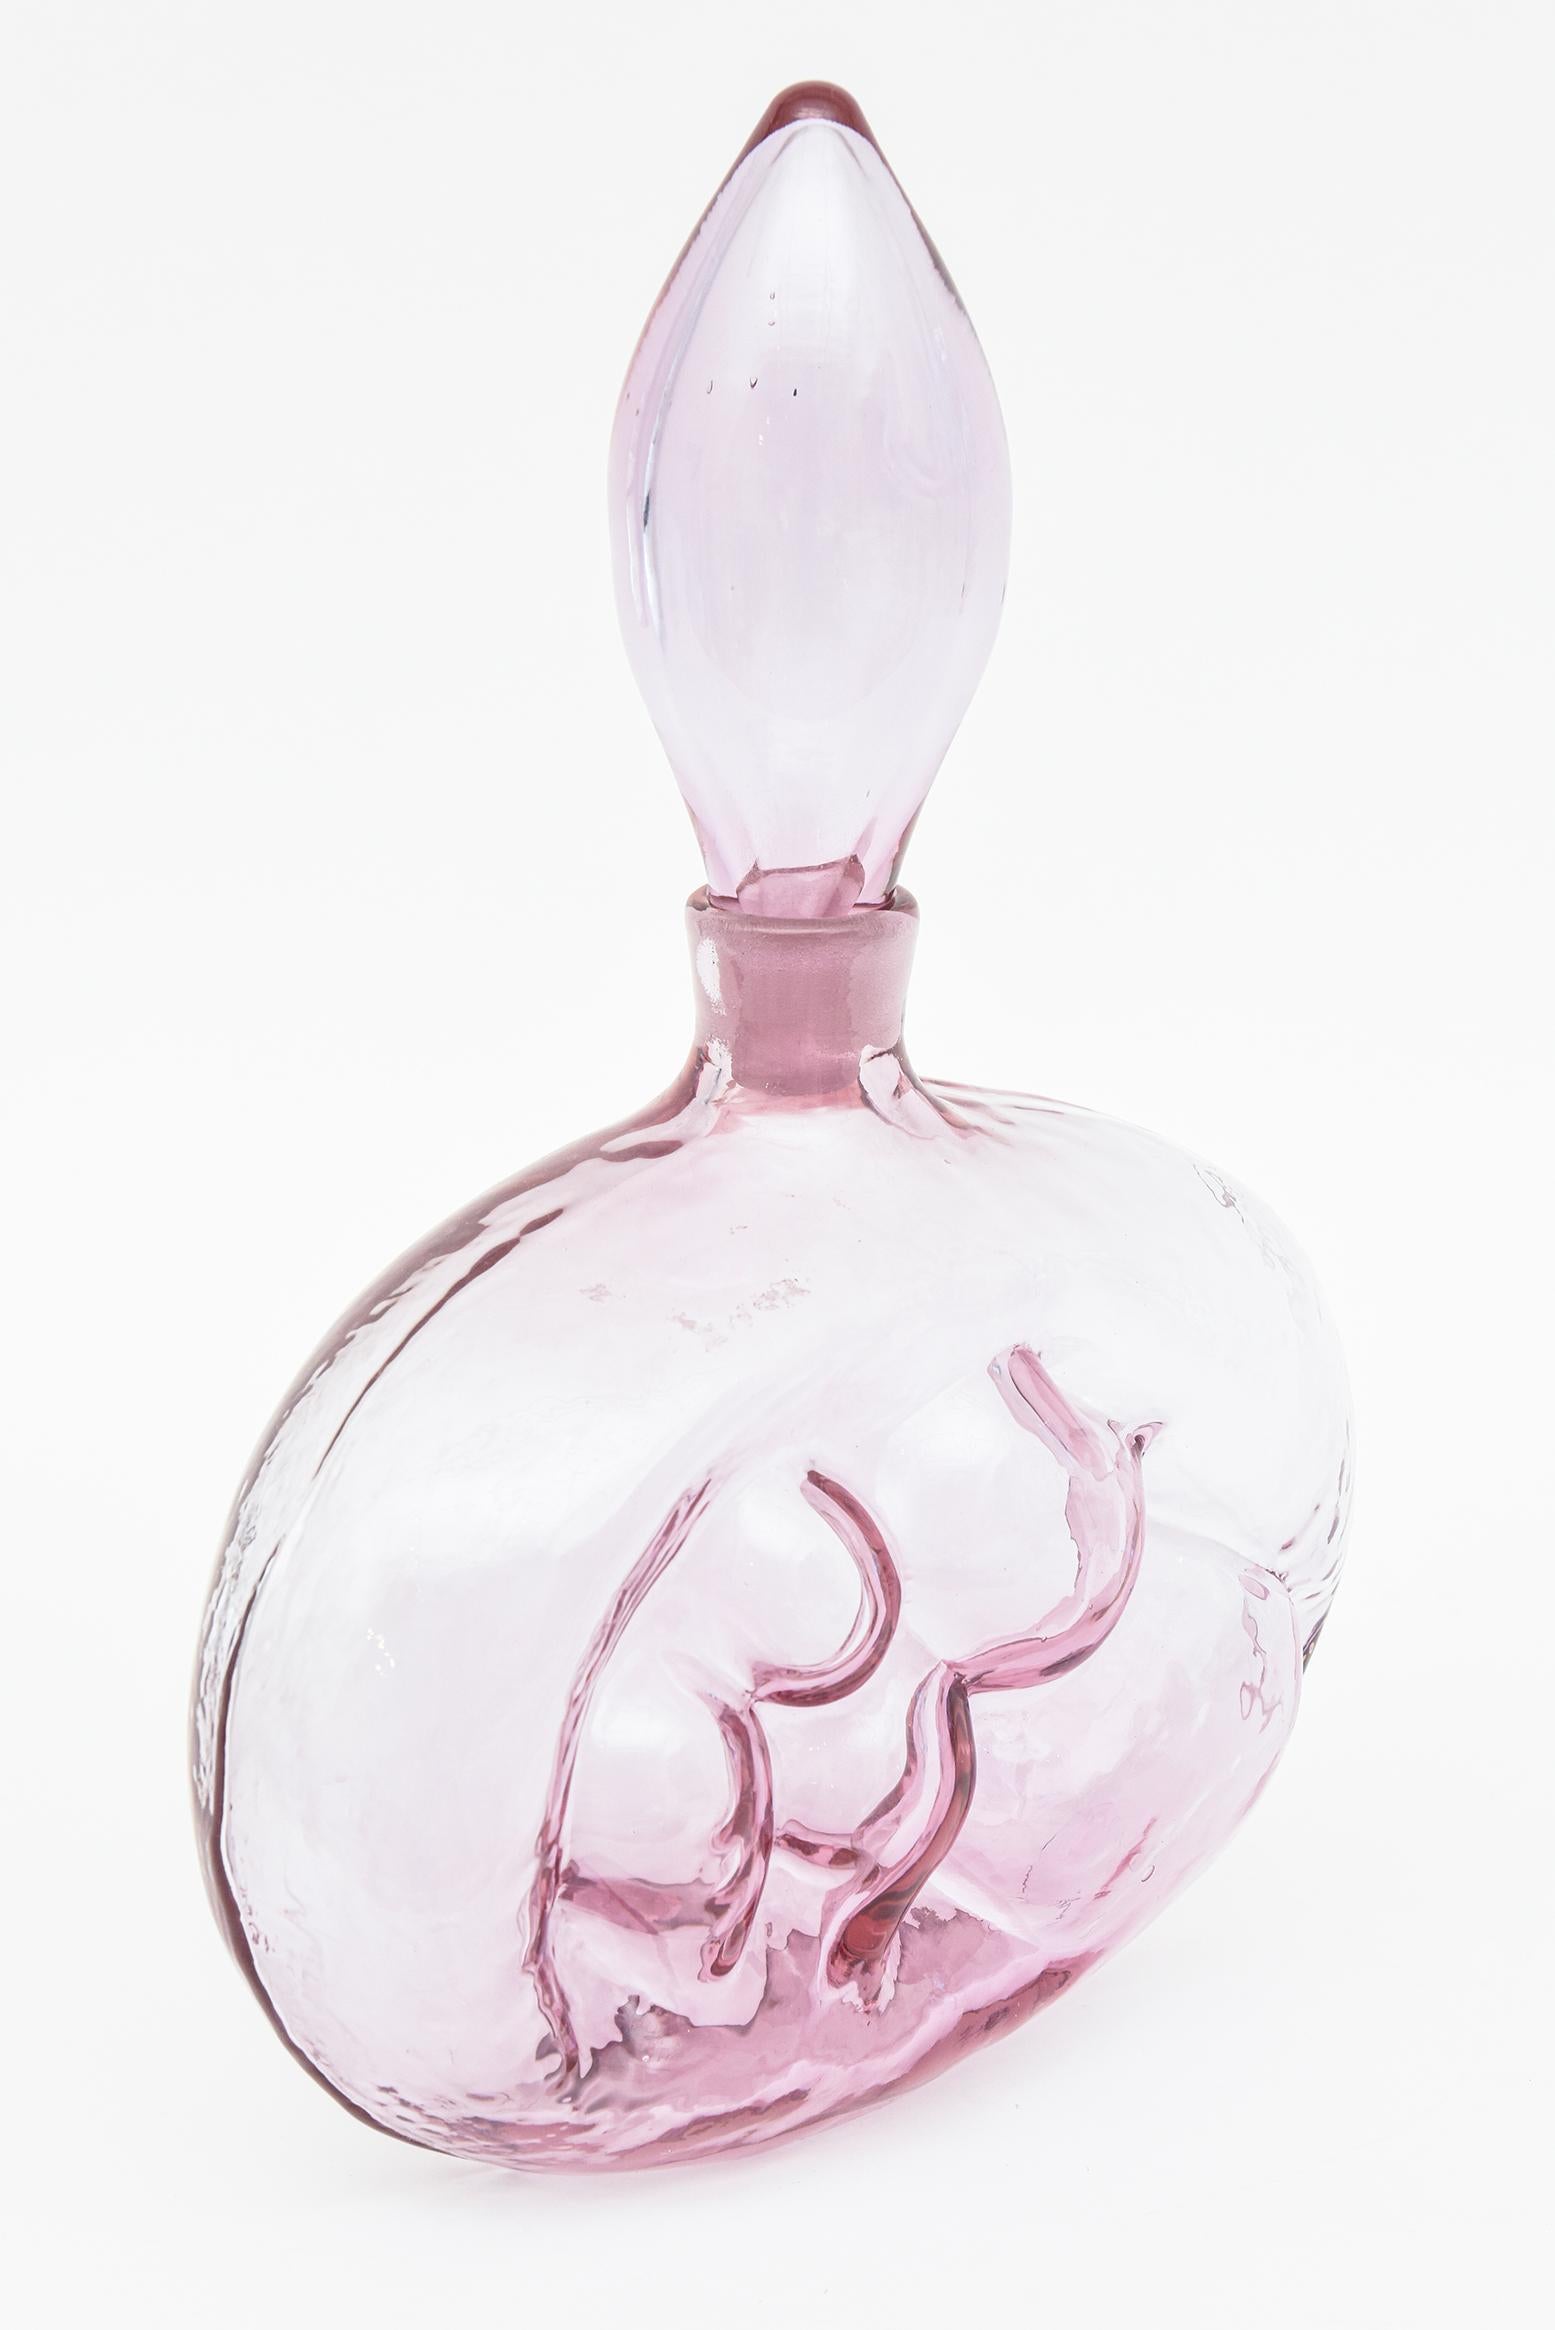 North American Vintage Blenko Light Purple Decanter Bottle With Stopper and Molded Design For Sale